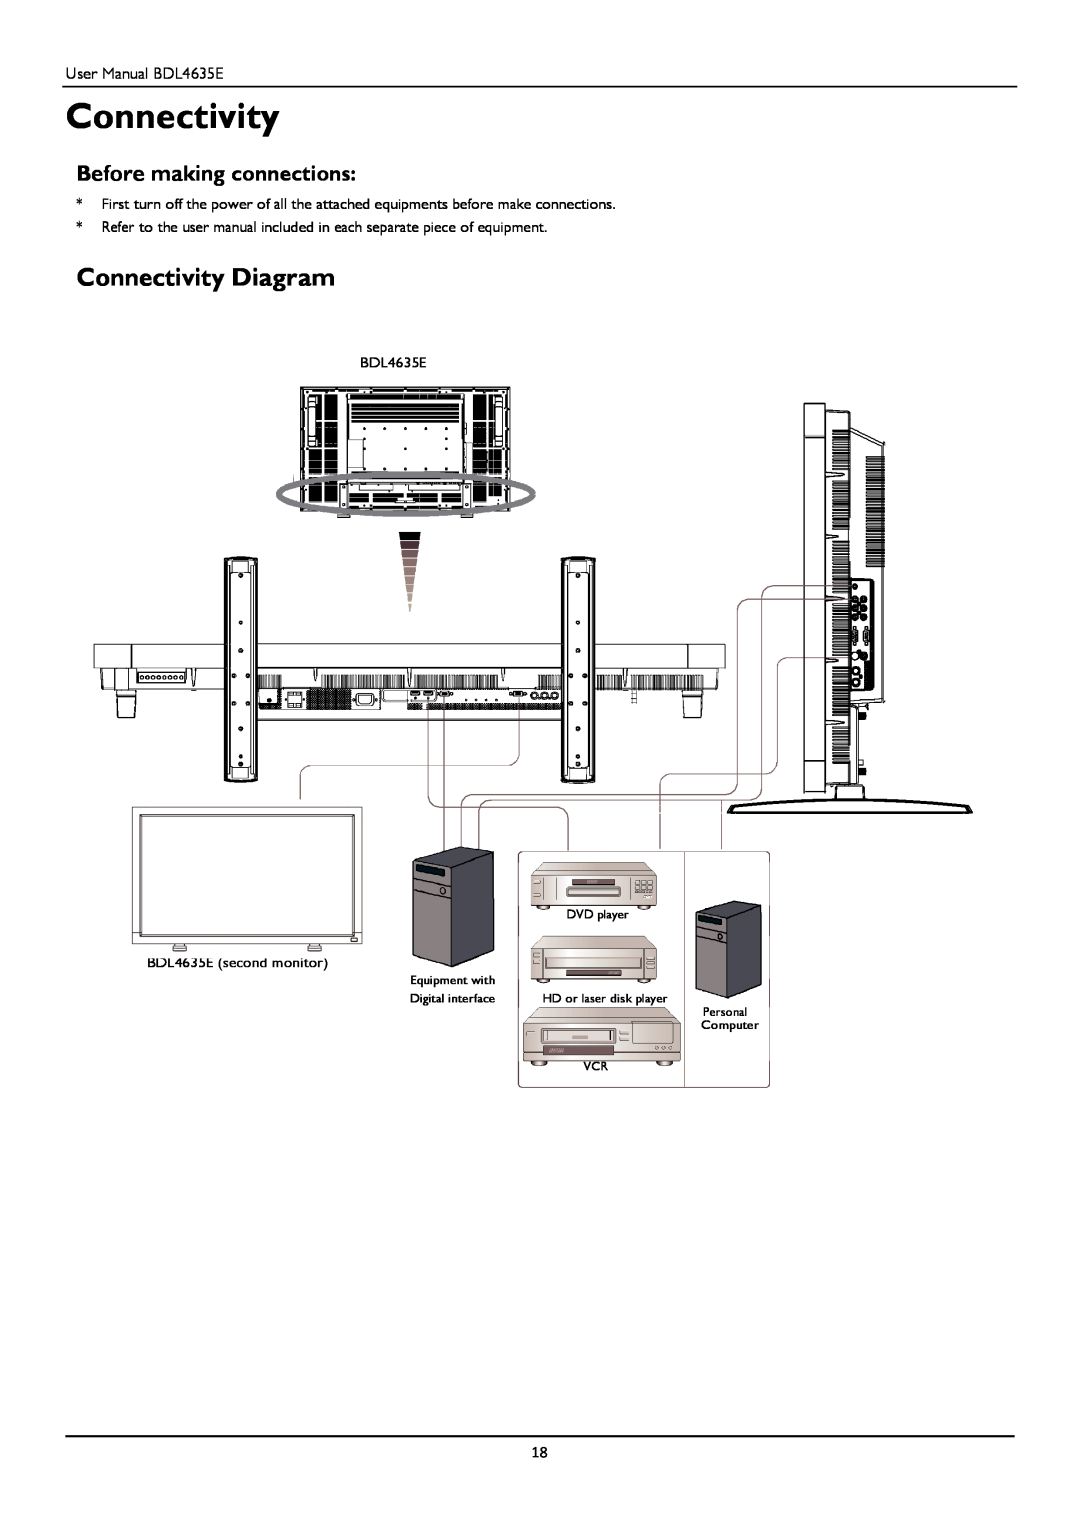 Philips BDL4635E Connectivity Diagram, Before making connections, DVD player, Equipment with, Digital interface 